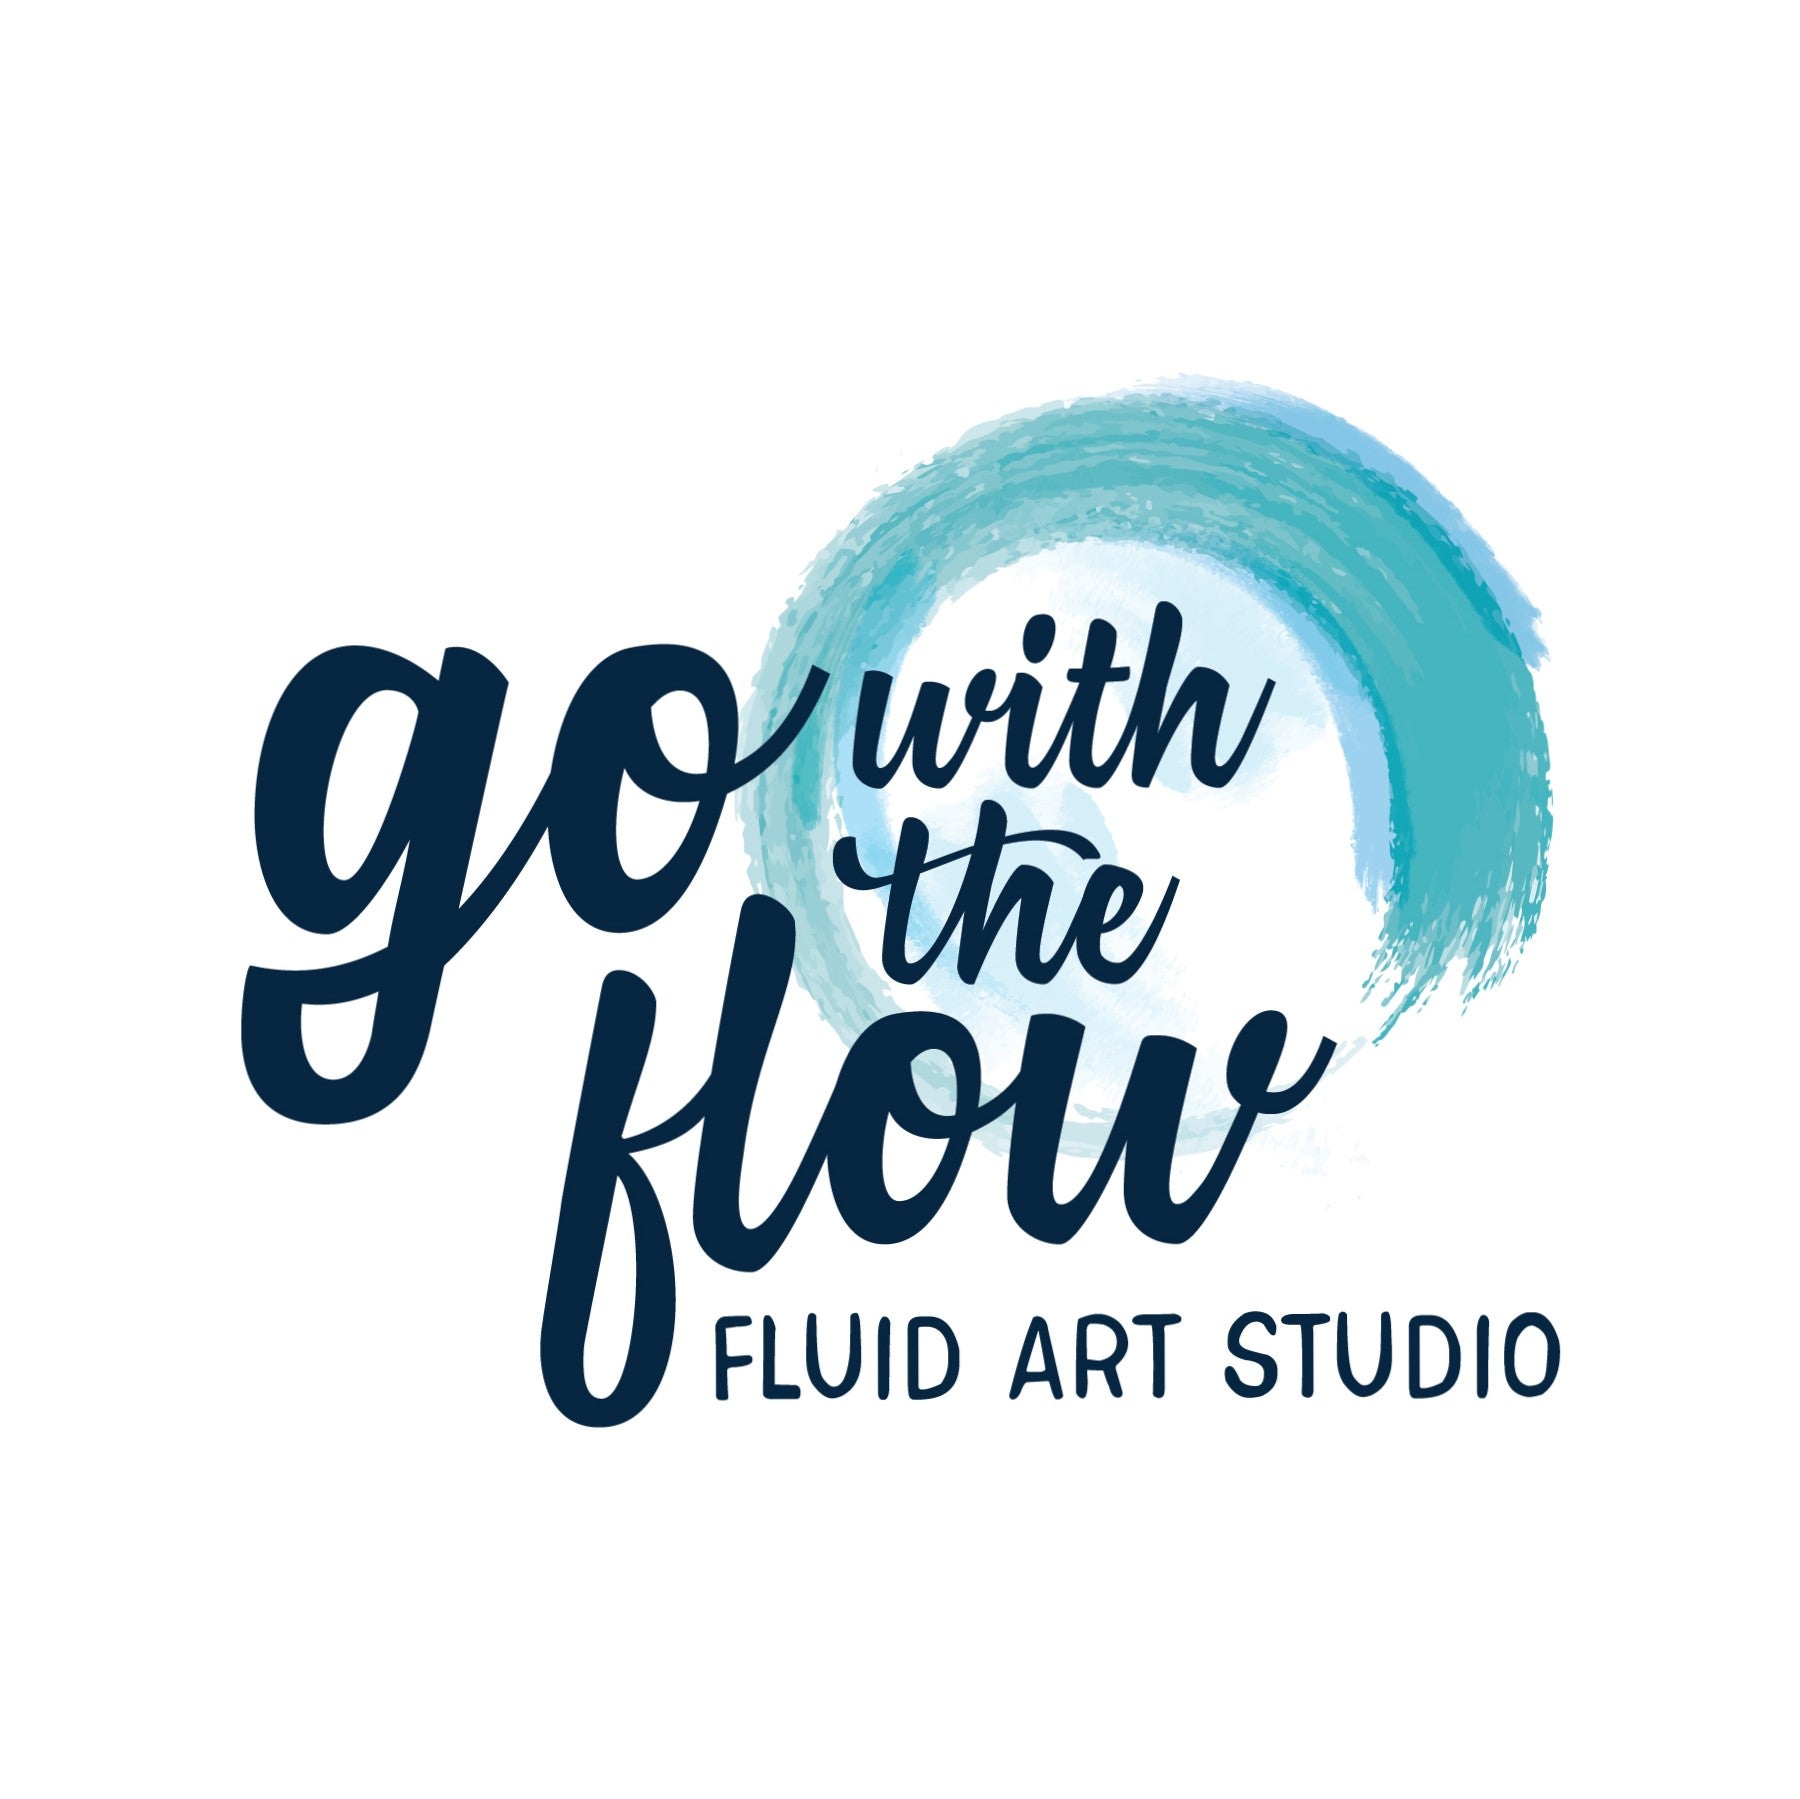 Go With The Flow - Home | Go with the Flow Fluid Art Studio